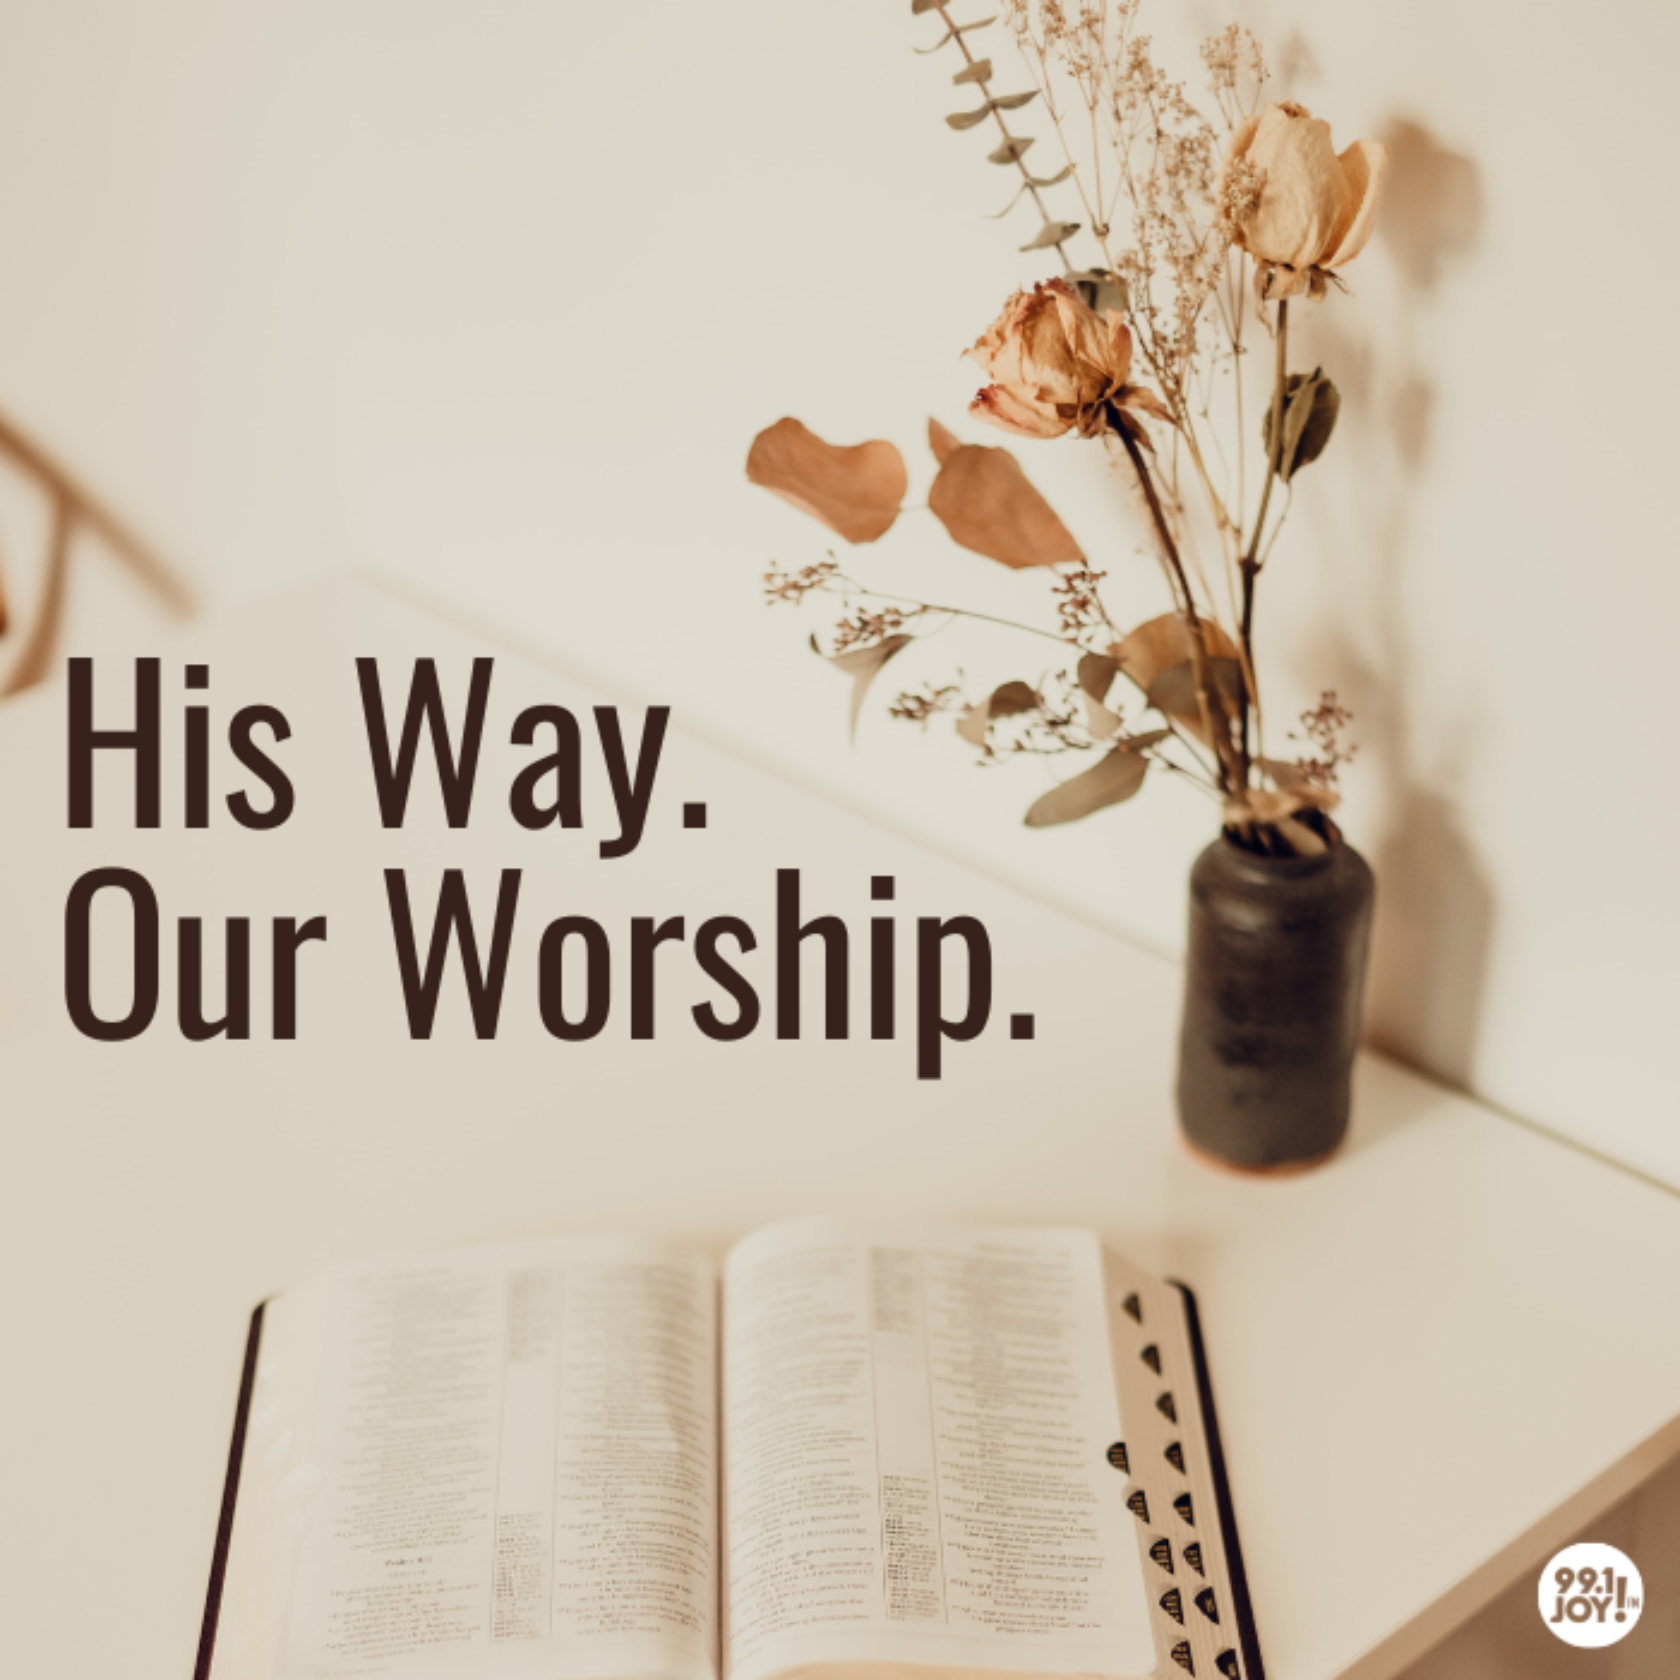 His Way. Our Worship.